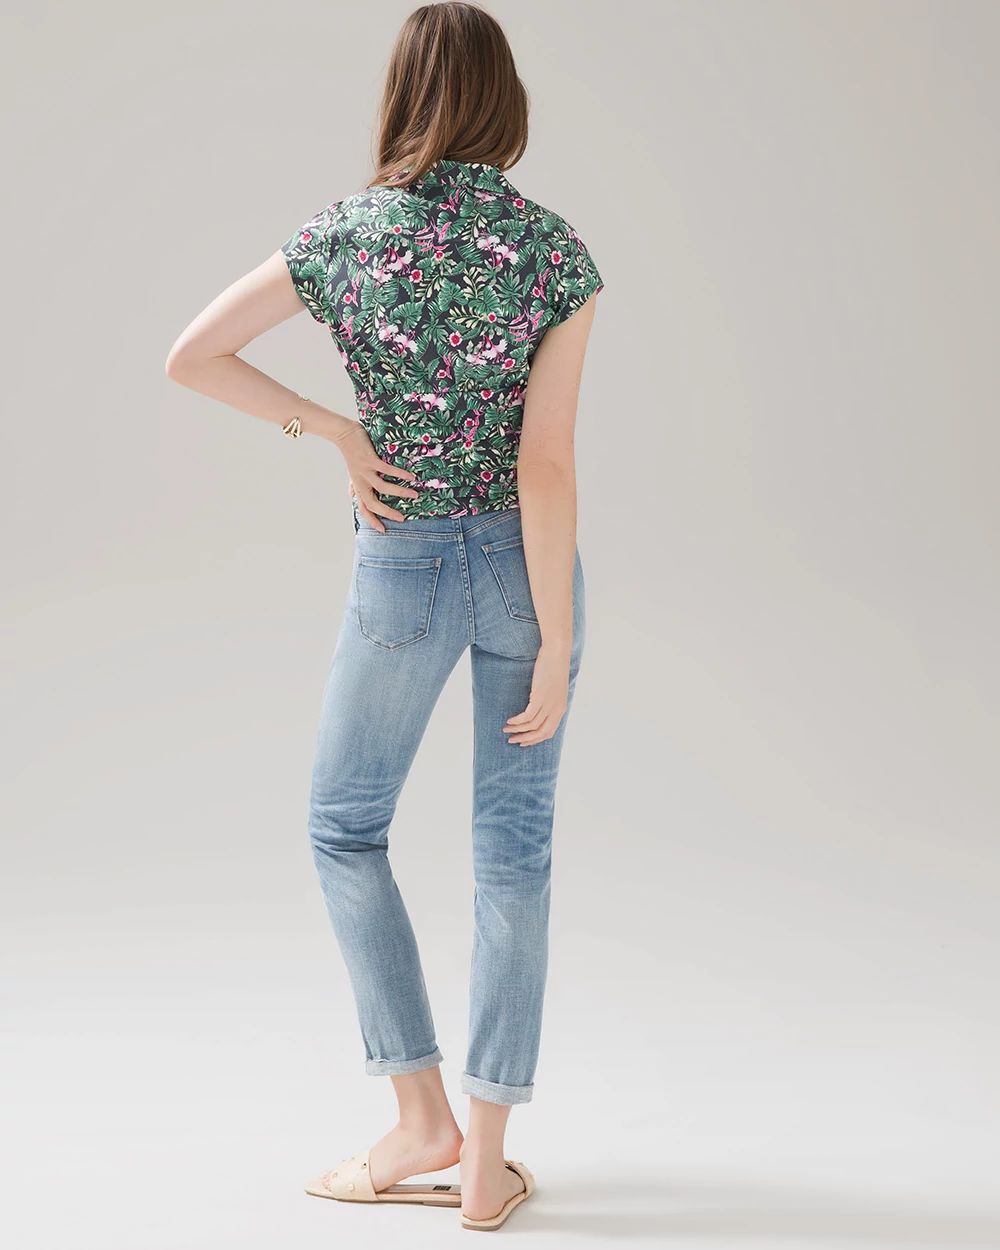 Ruched Waist Floral Shirt click to view larger image.